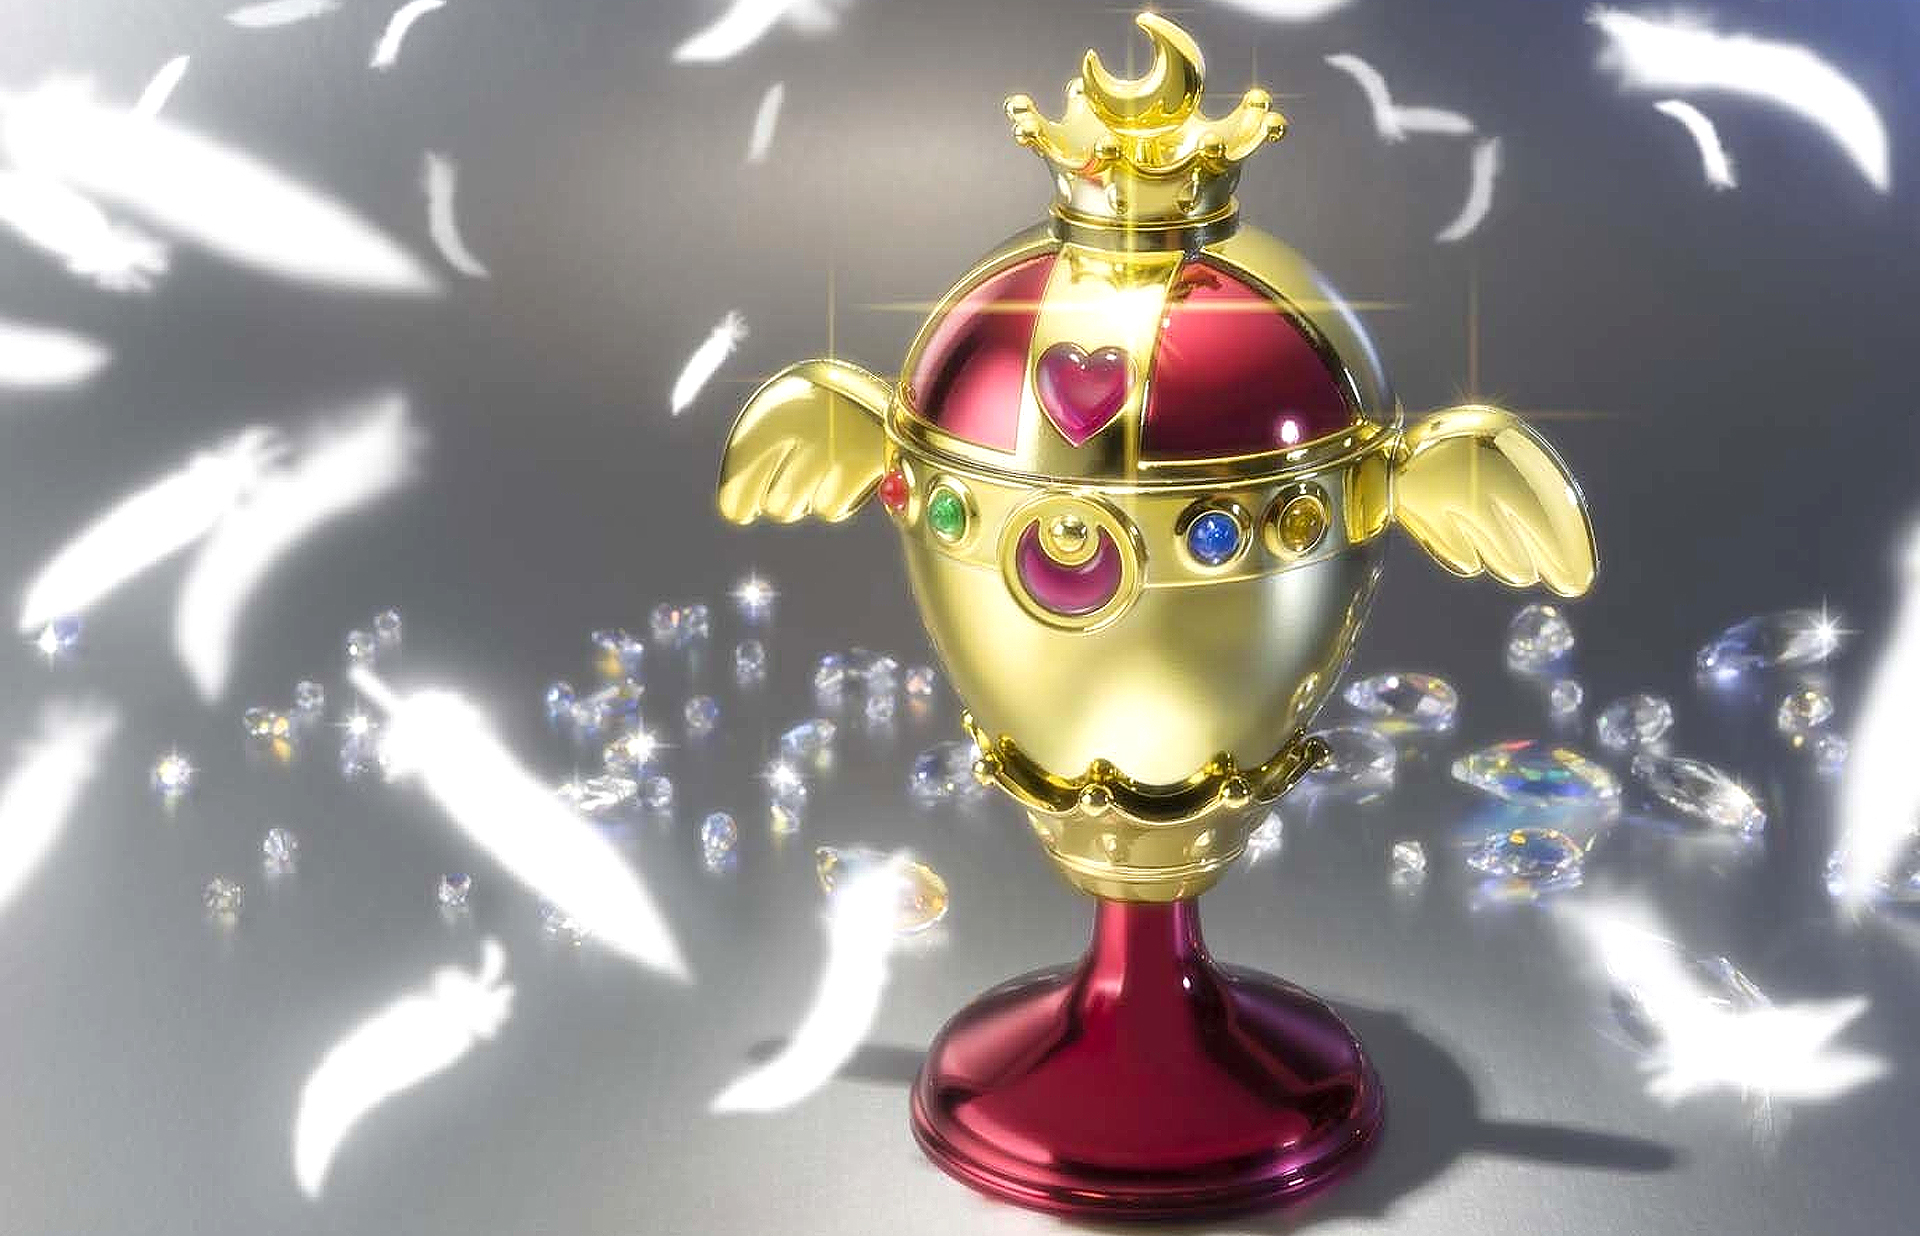 Sailor Moon Tamashii Nations Rainbow Moon Chalice/Holy Grail Proplica surrounded by white feathers.